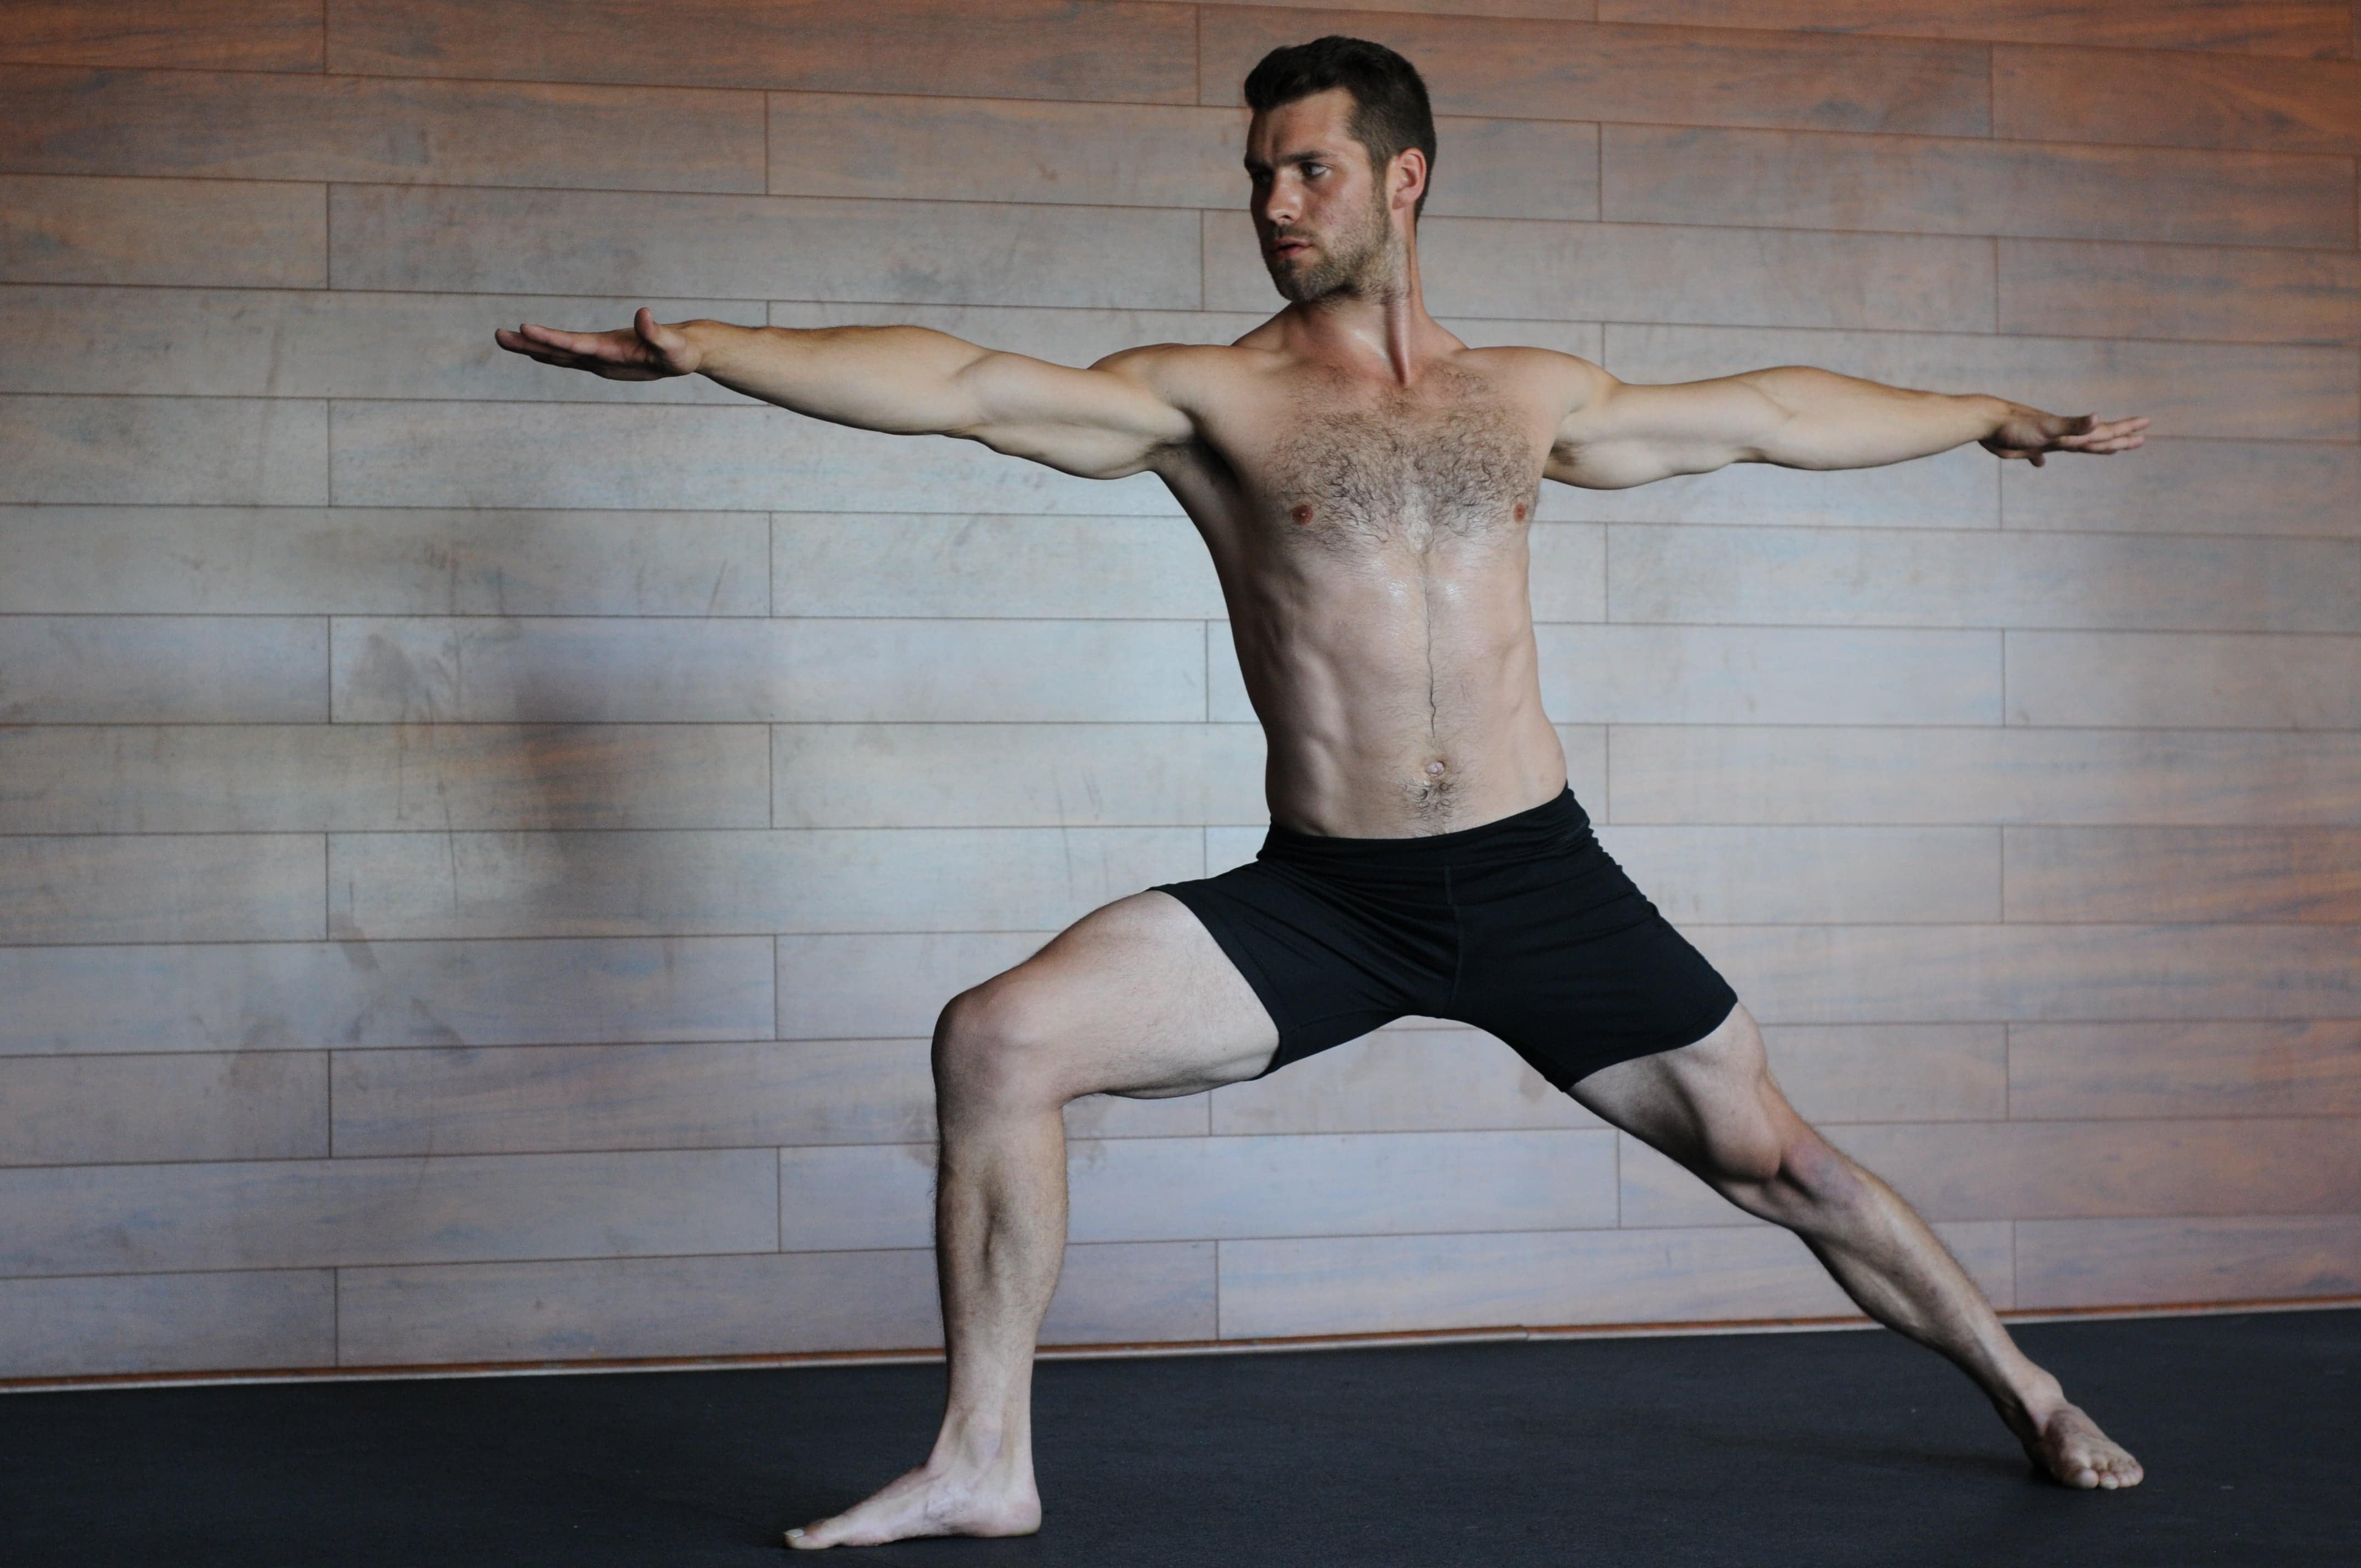 Mastering the Extraordinary: Advanced Yoga Poses for Three People